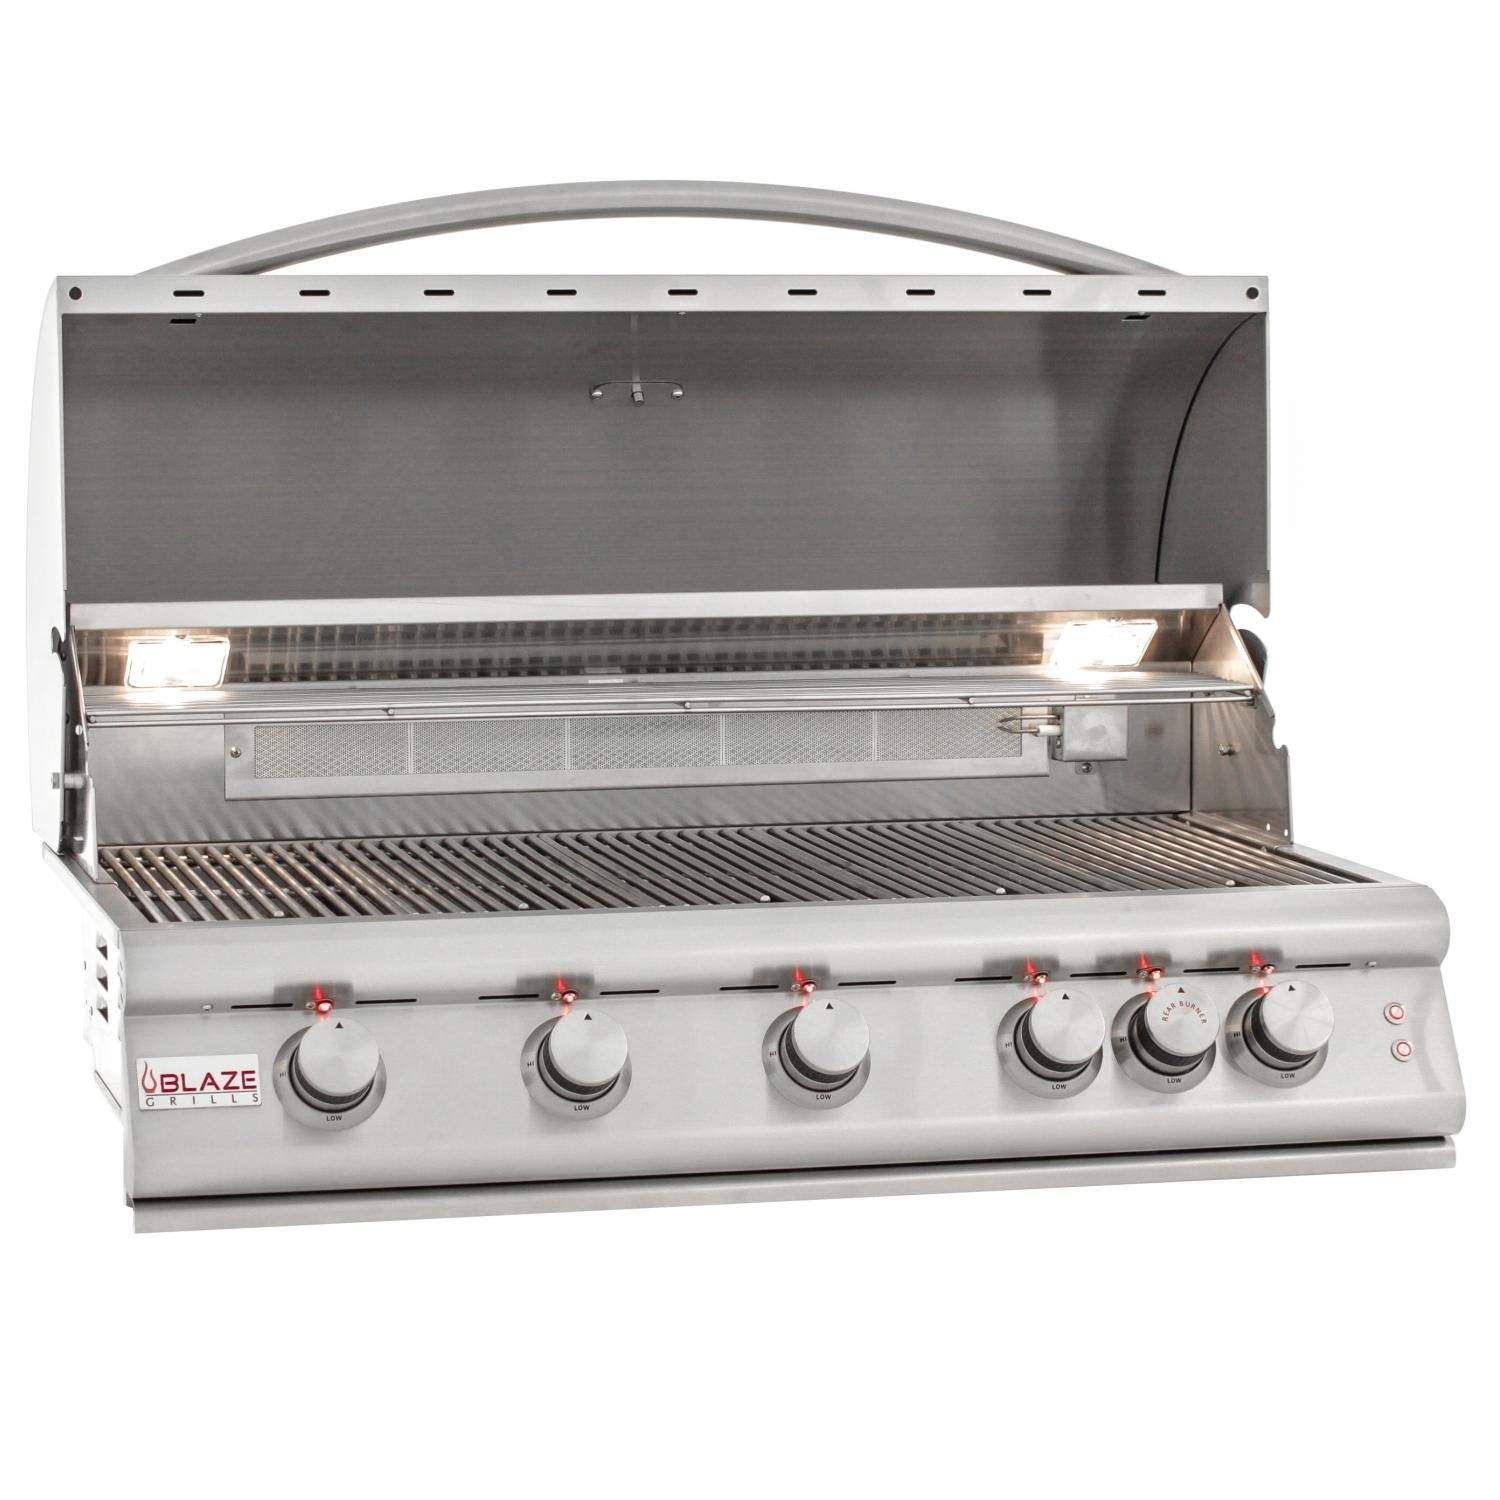 Texas Outdoor Patio Grill Center - Popular Grill Store